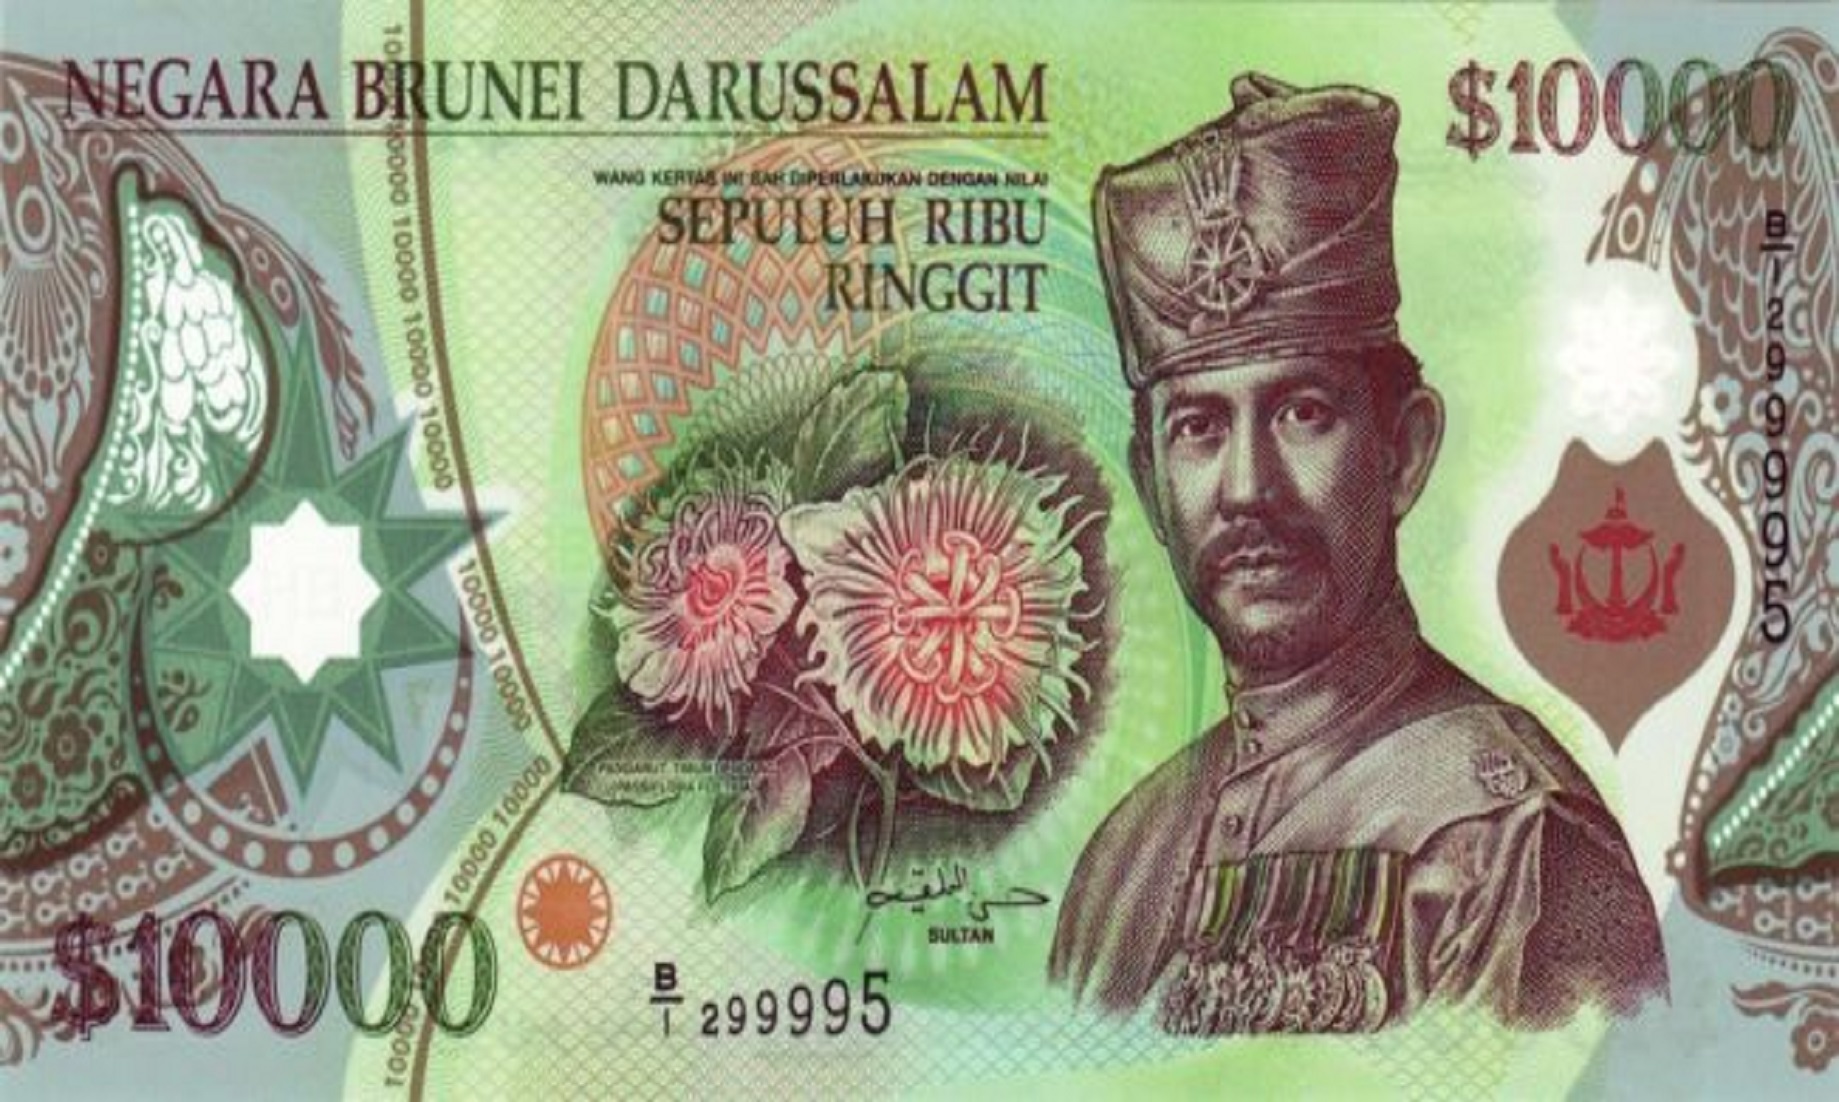 Brunei To Cease Issuing, Circulation Of Biggest Currency Notes